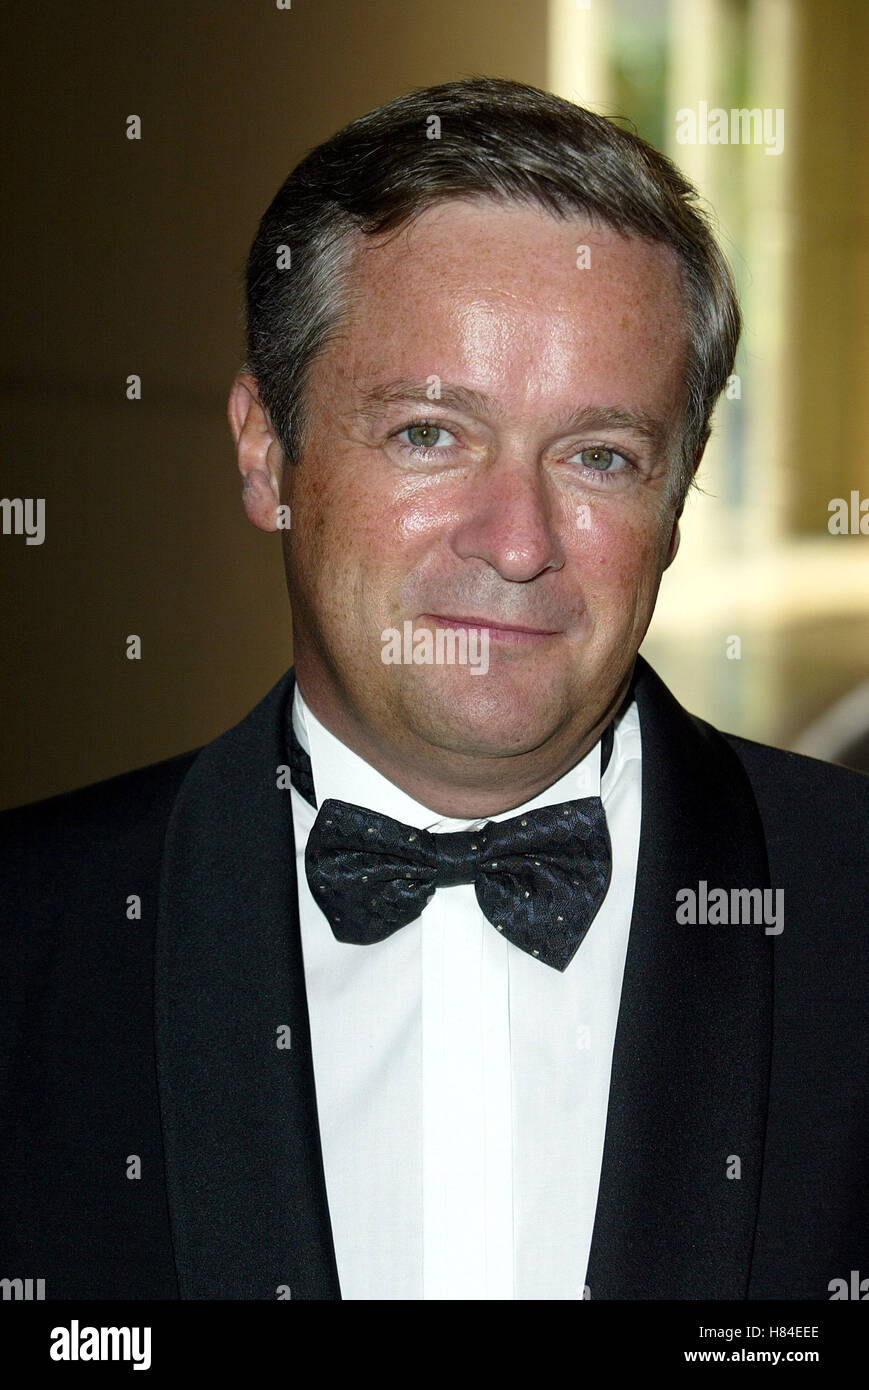 JEAN MARIE MESSIER BEVERLY HILTON HOTEL DOWNTOWN LOS ANGELES USA 02 May 2002 Stock Photo